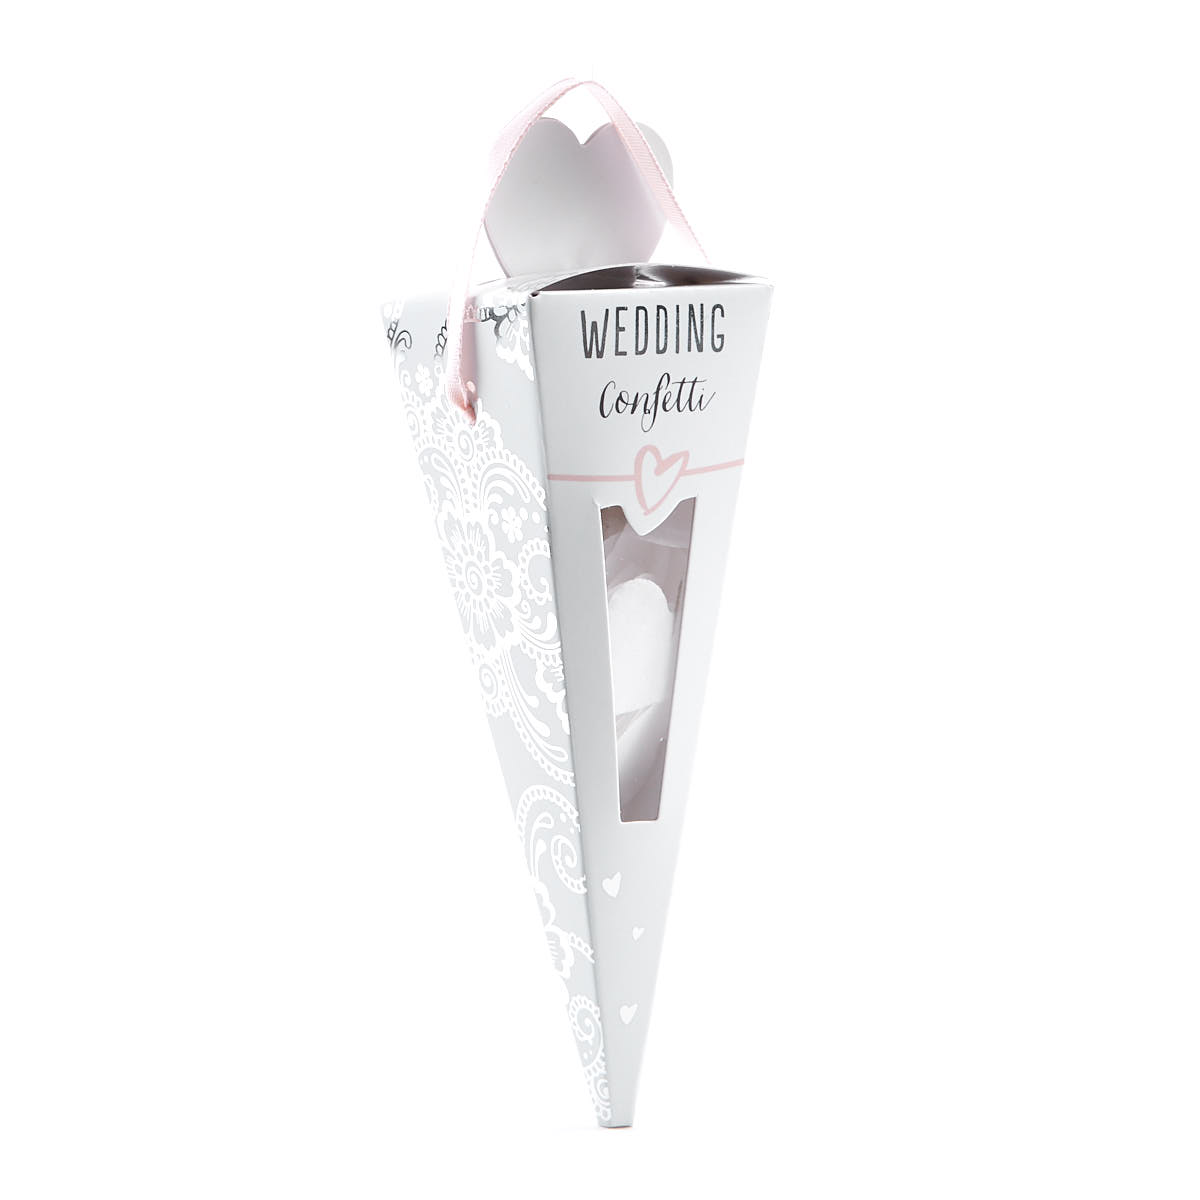 White Biodegradable Wedding Confetti - Pack Of 15